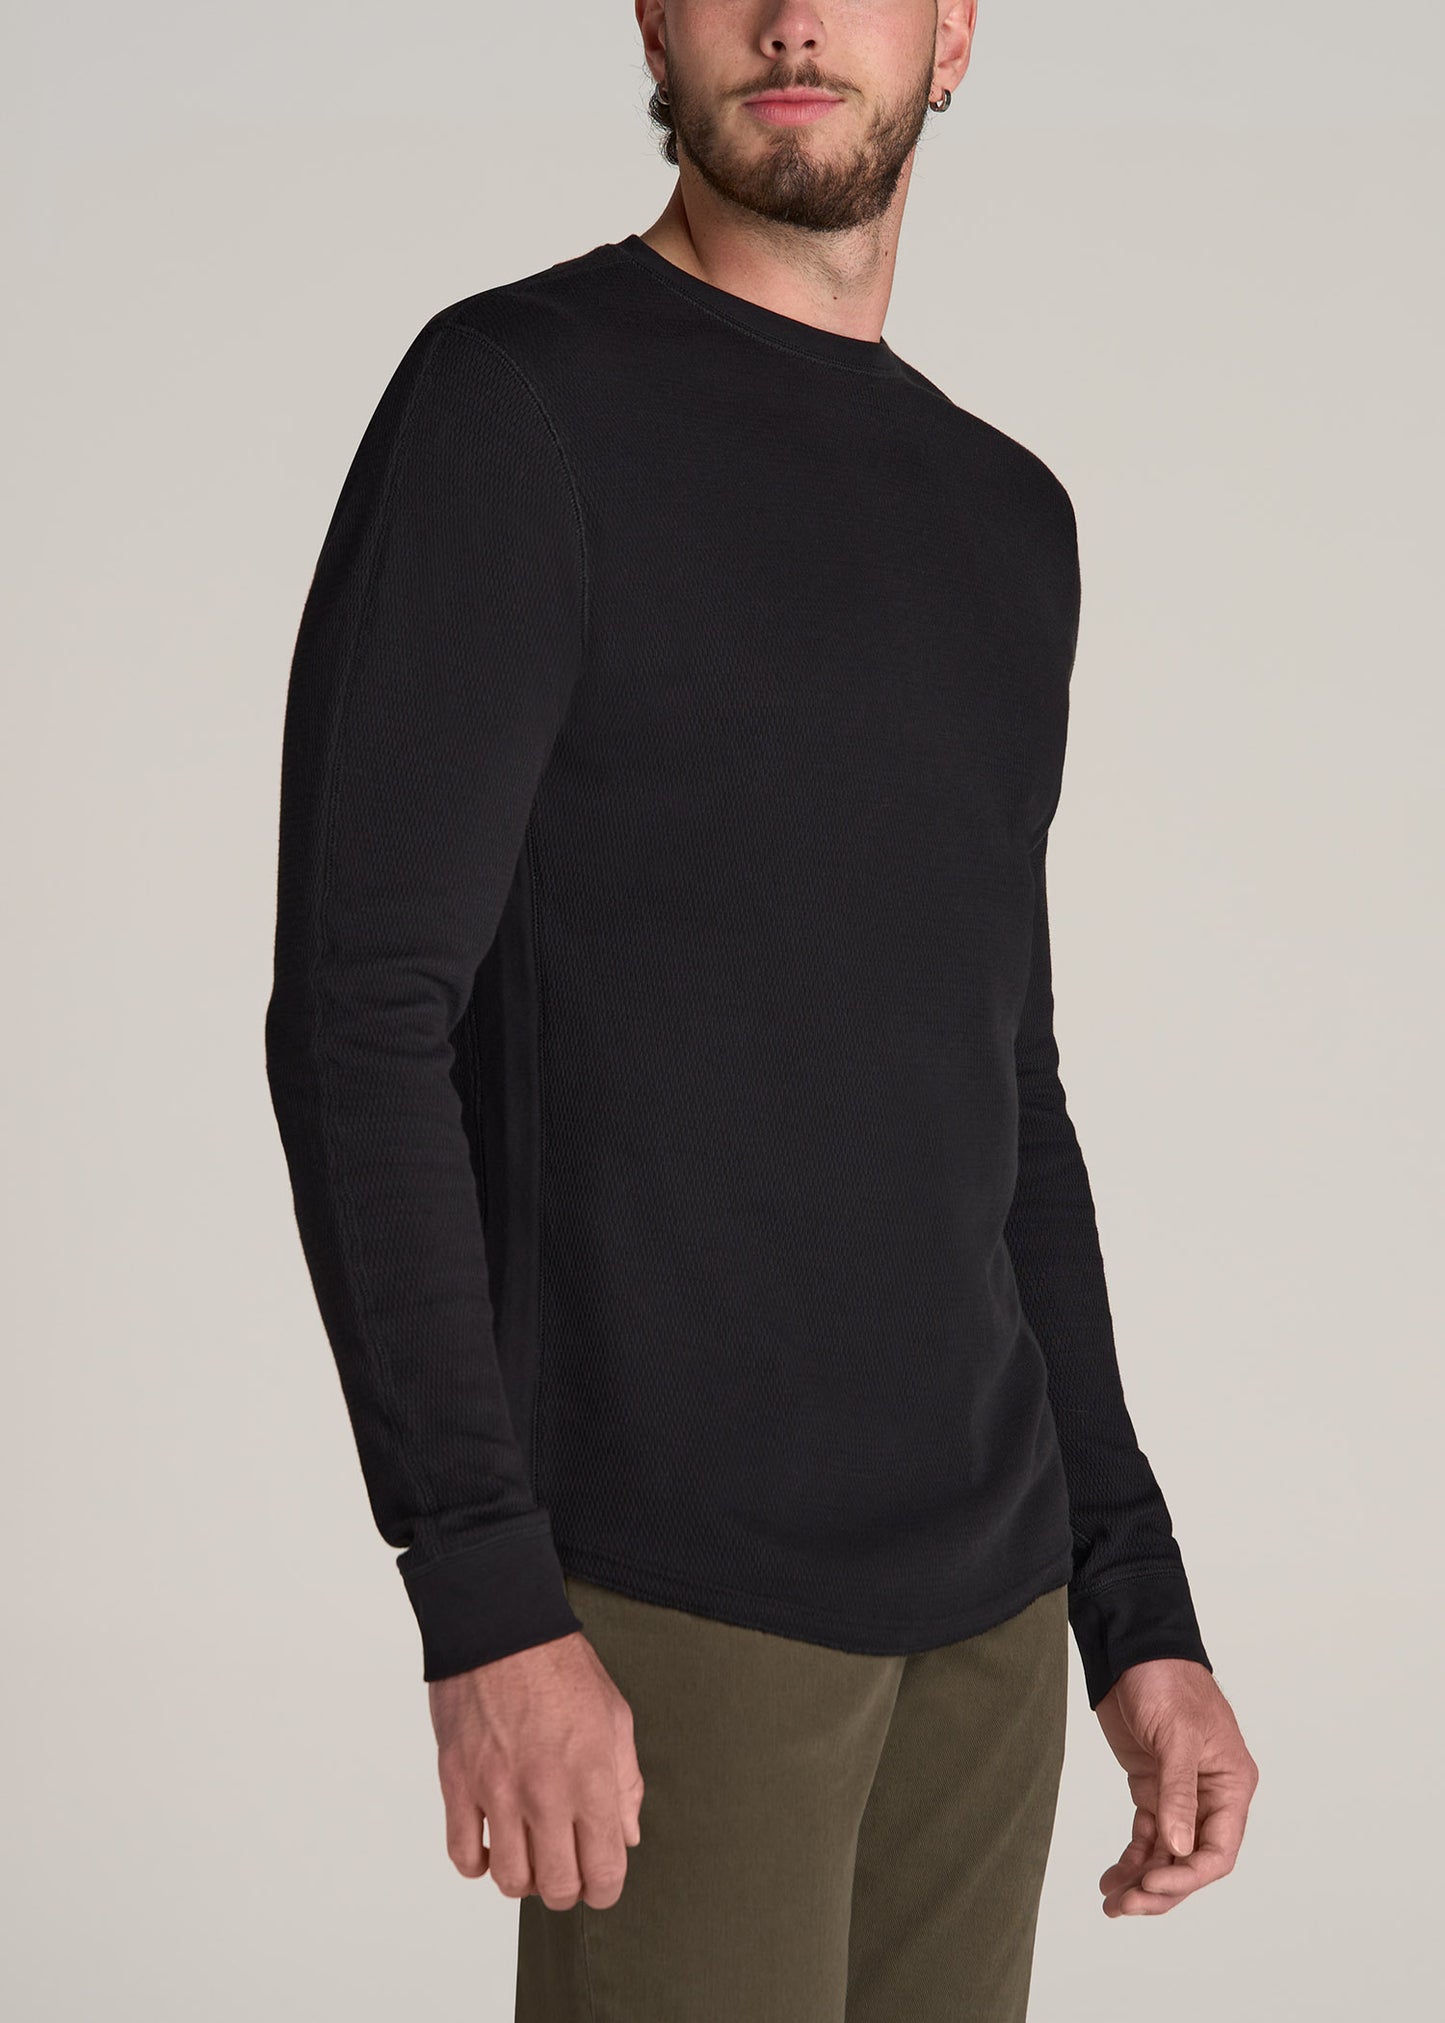 American-Tall-Men-Double-Honeycomb-Thermal-Crewneck-Black-side